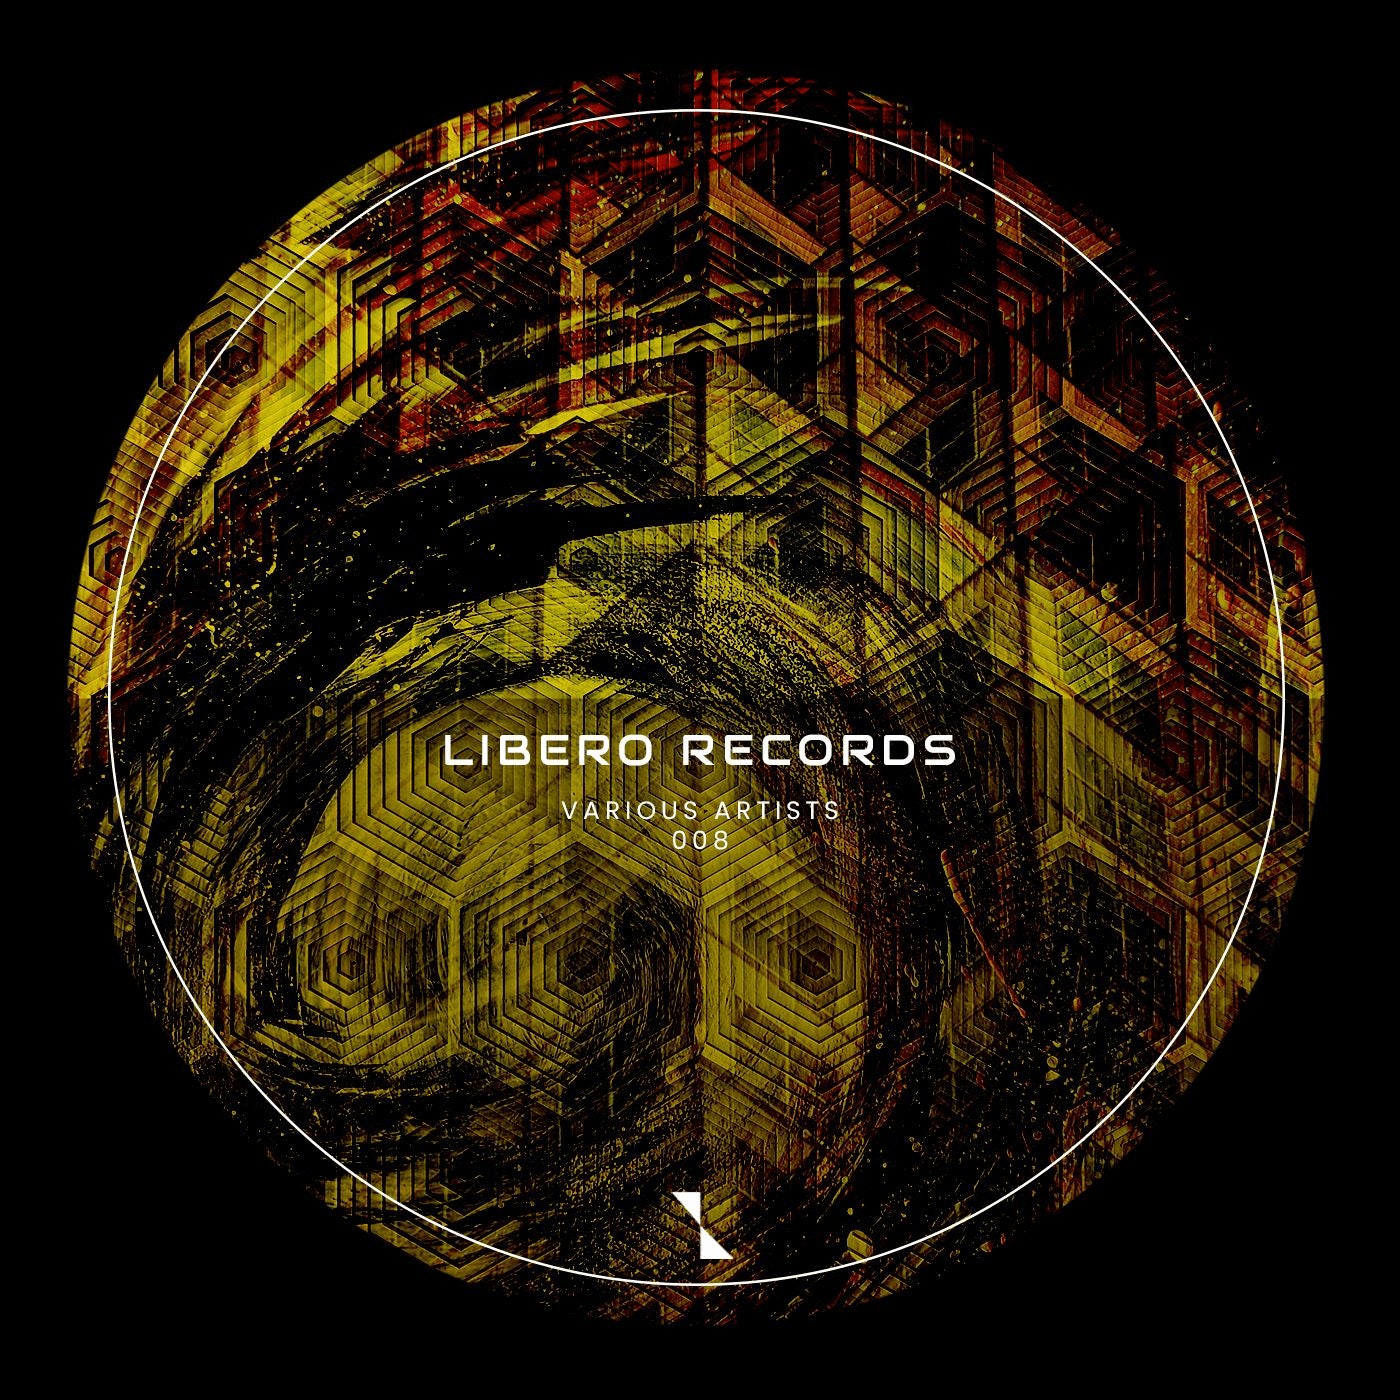 image cover: VA - Various Artists 008 on Libero Records